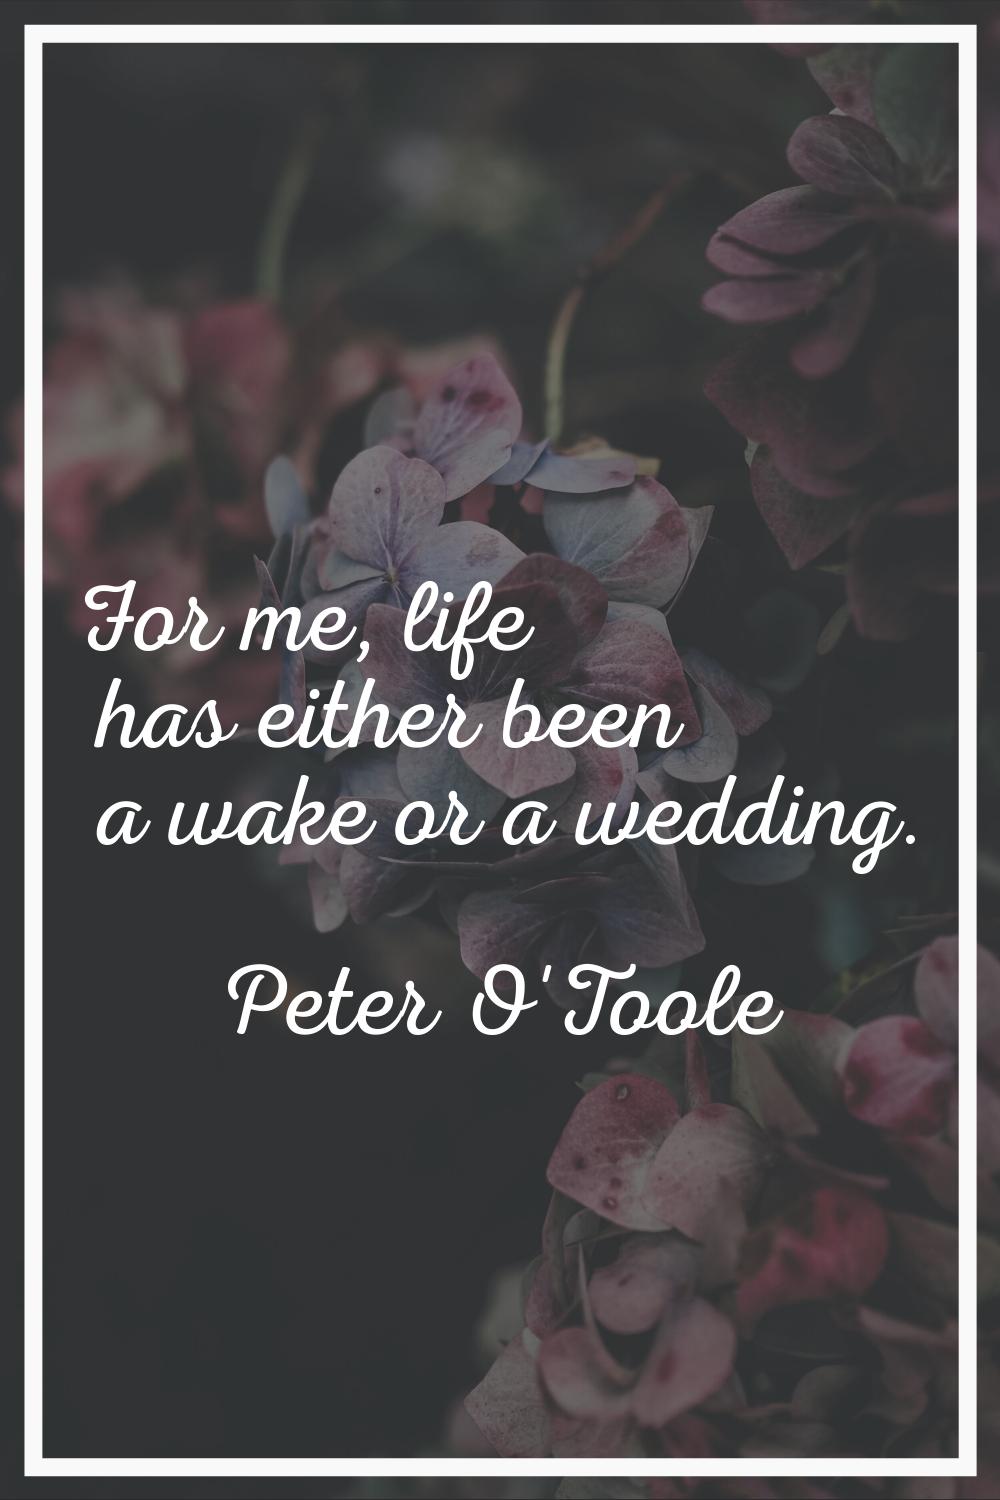 For me, life has either been a wake or a wedding.